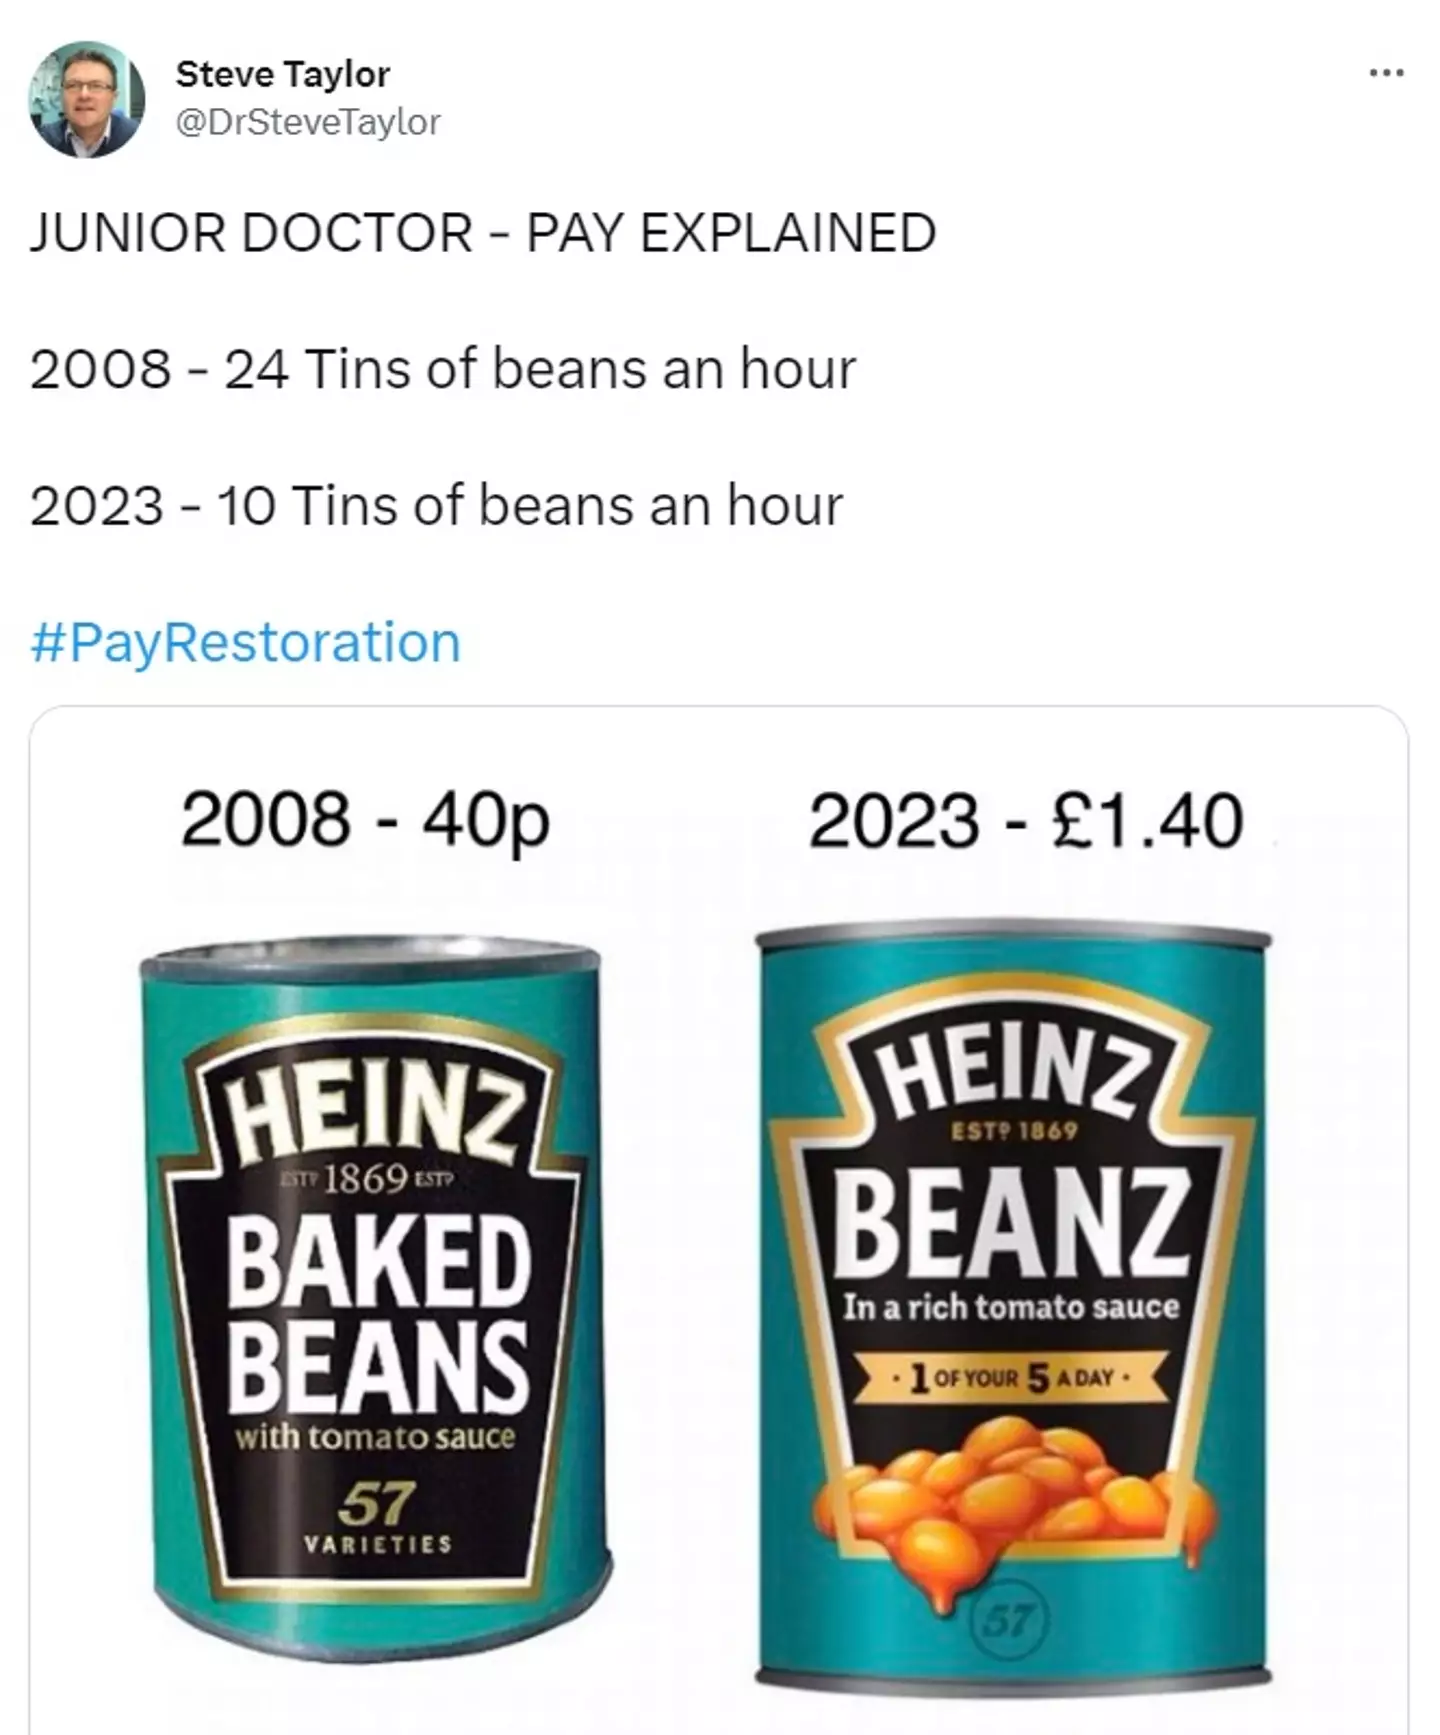 Beans, beans the wonderful fruit, the more you eat the more you understand the crippling economic unfairness of real terms pay losses.